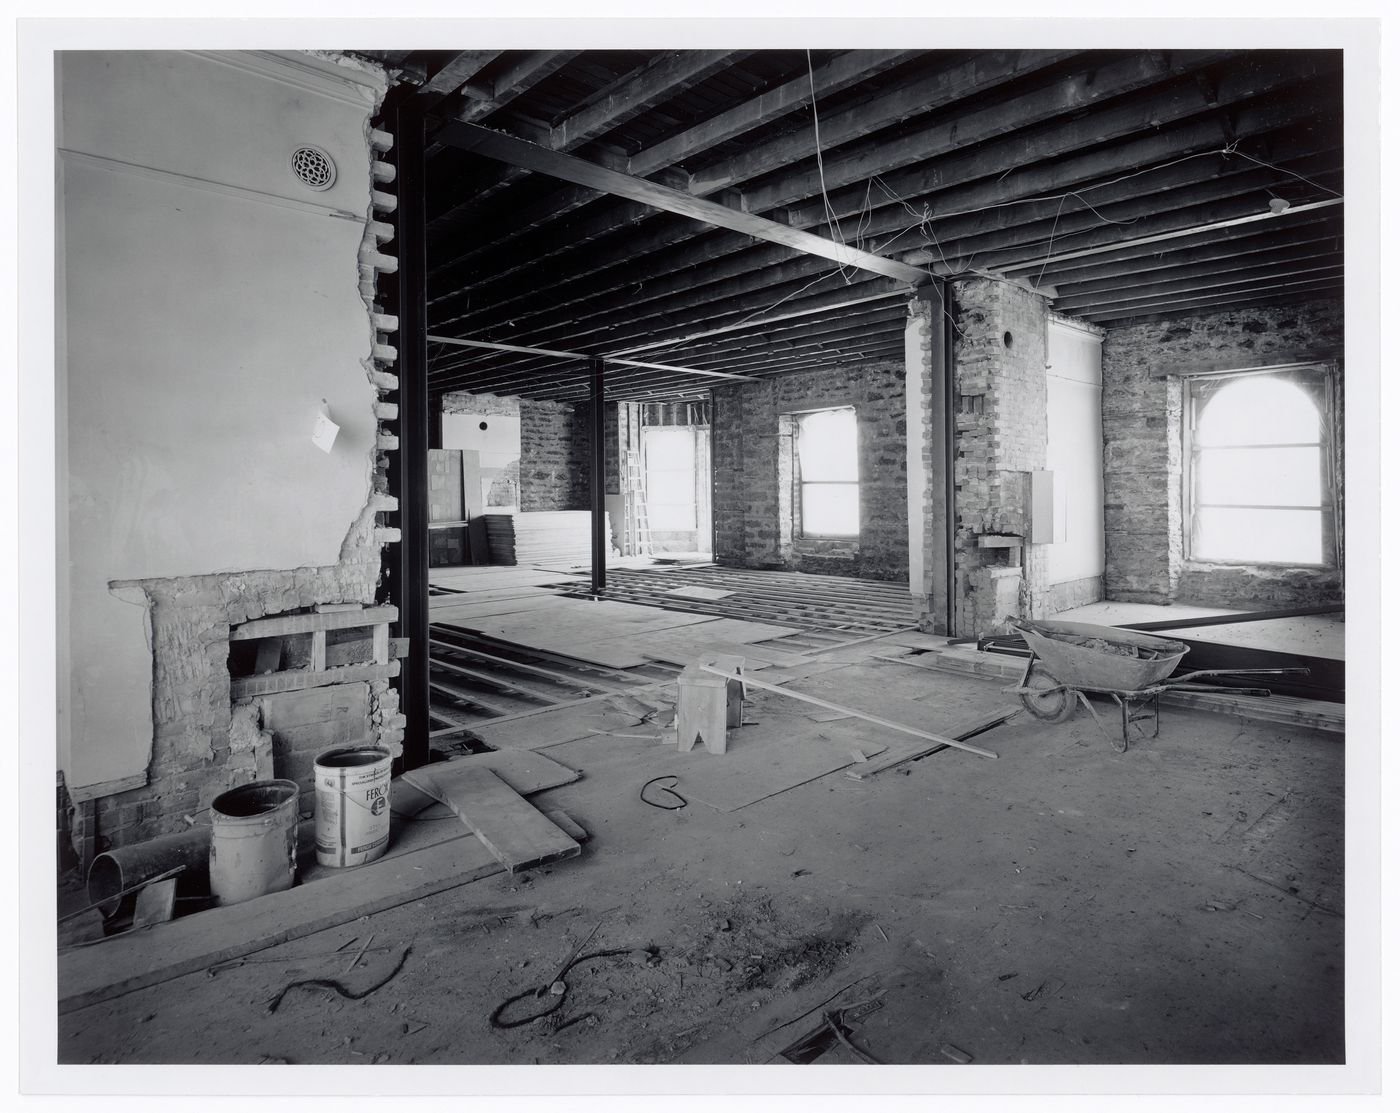 Interior view of level 5 or 6 stripped to the brick walls and ceiling joists, Shaughnessy House under renovation, Montréal, Québec